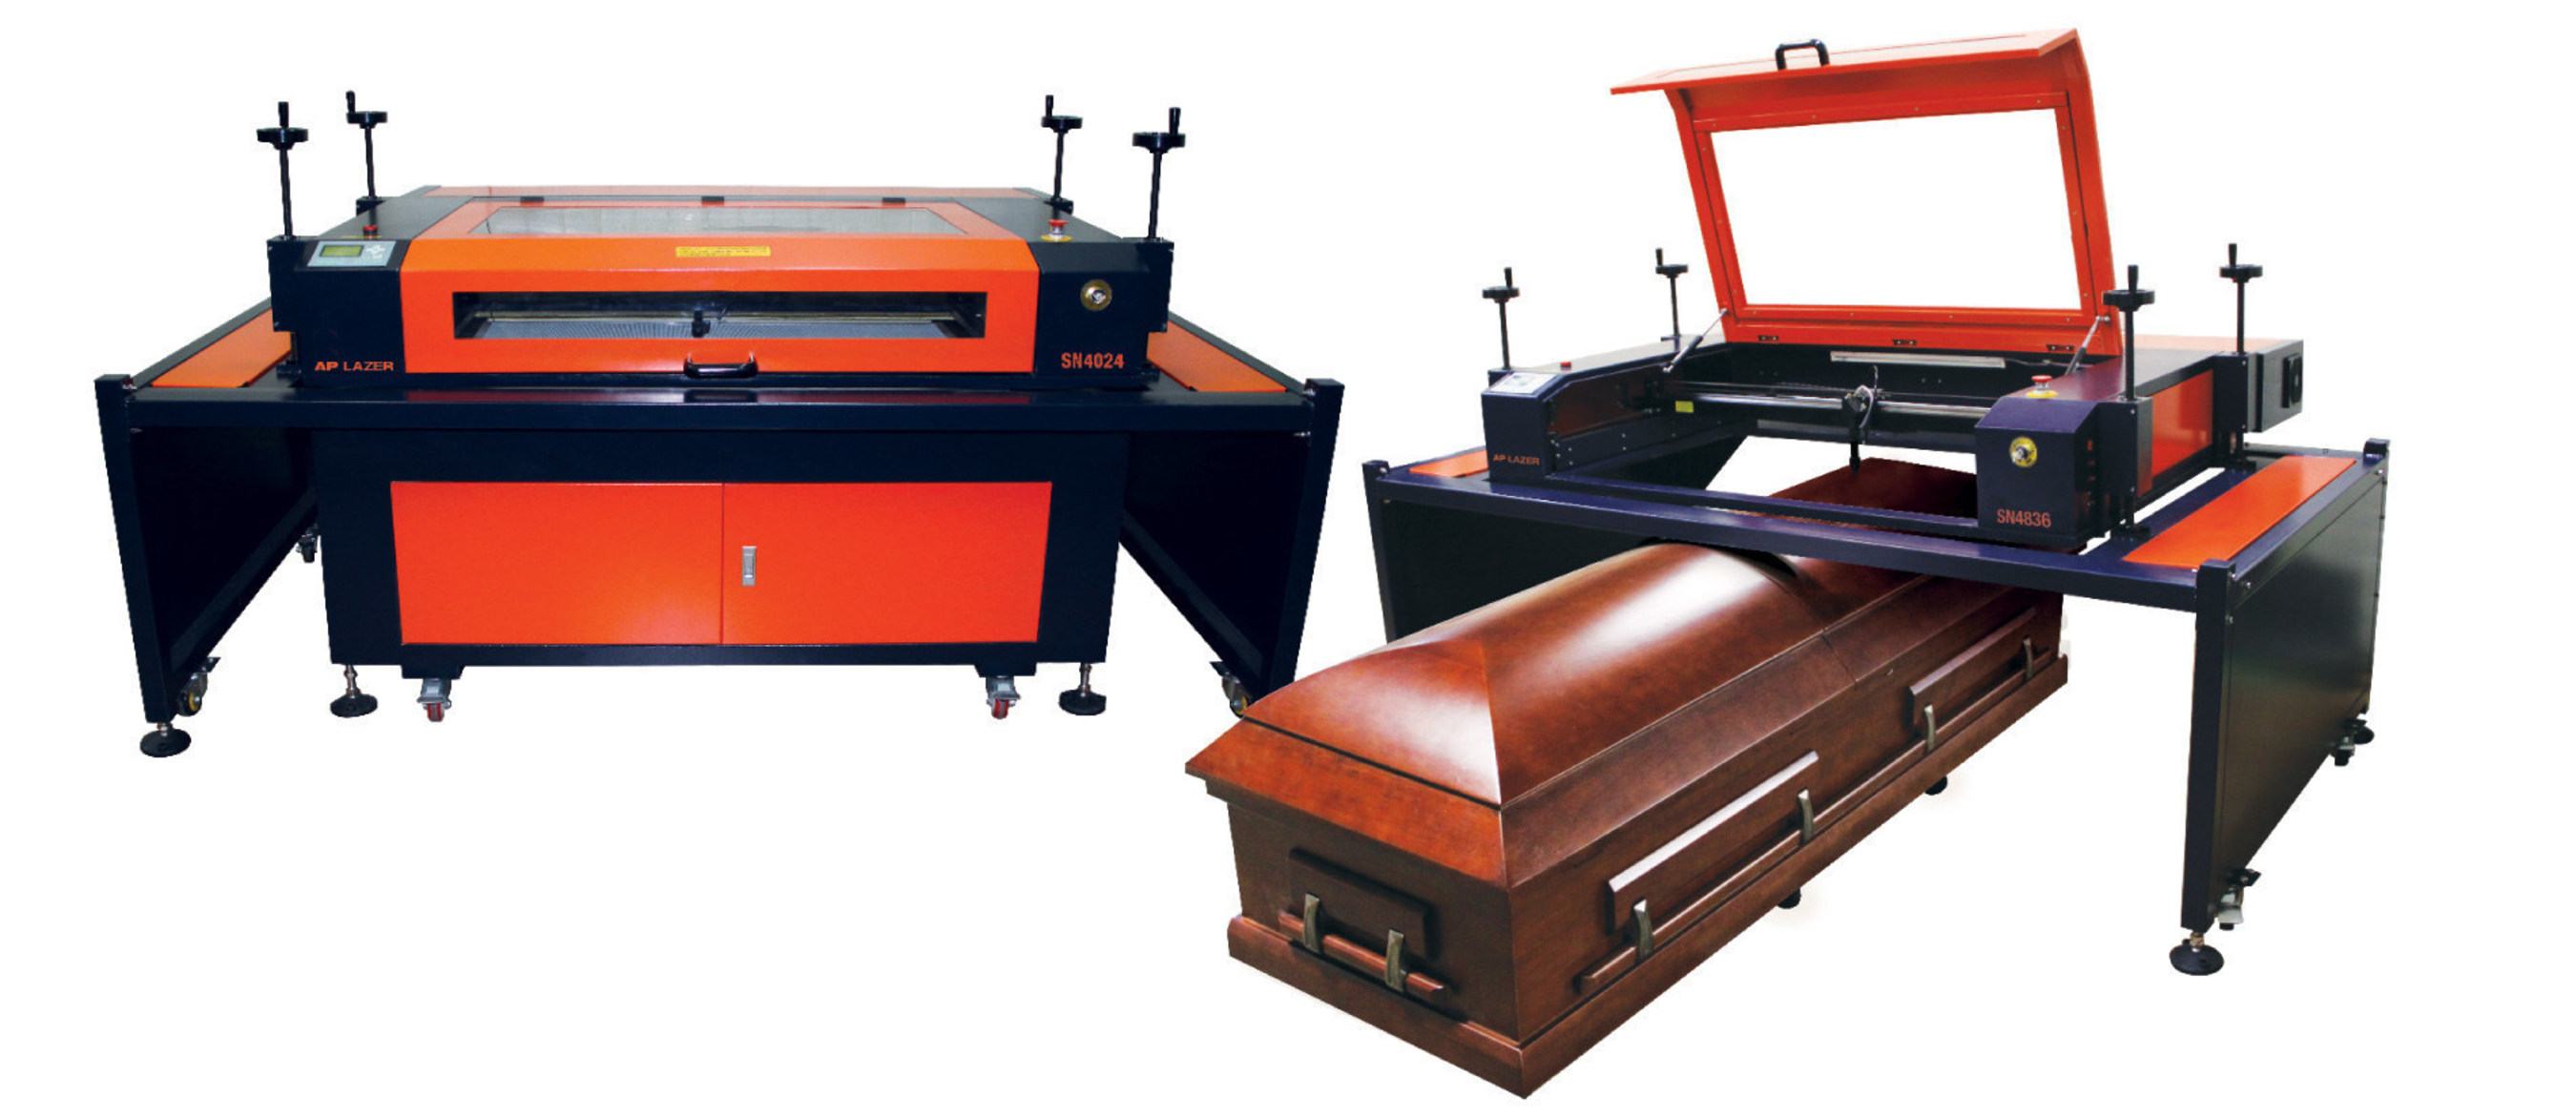 The patented AP Lazer machine, with an open architecture, can engrave from a pen to a casket or a granite monument.